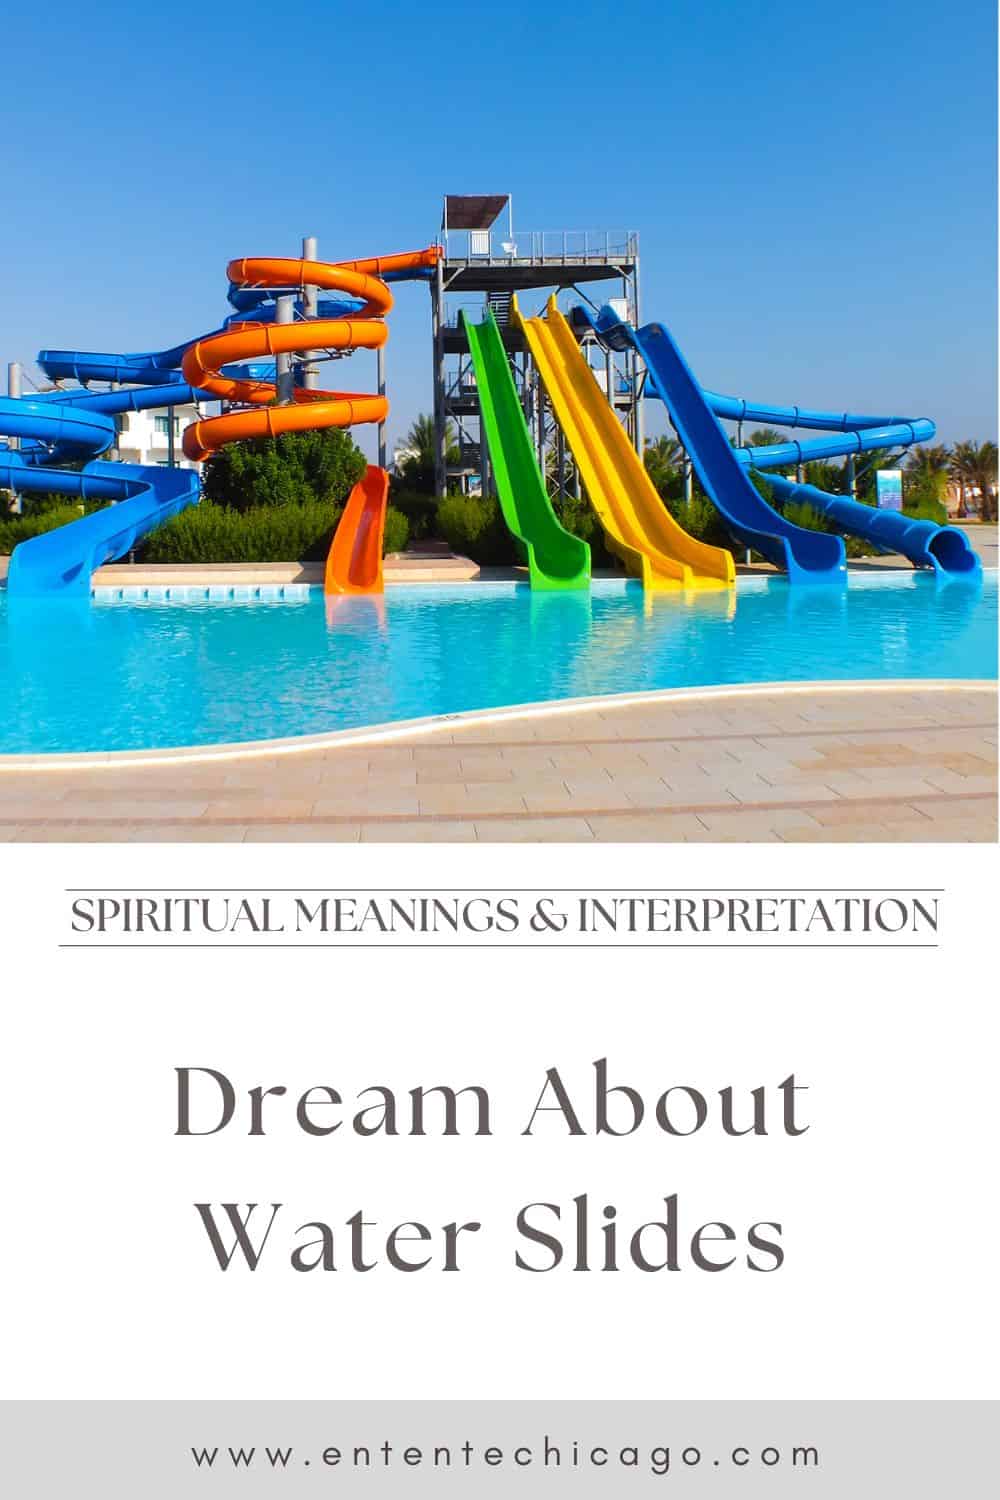 Dreaming Of Water Slide Dream About Water Slides (Spiritual Meanings & Interpretation)